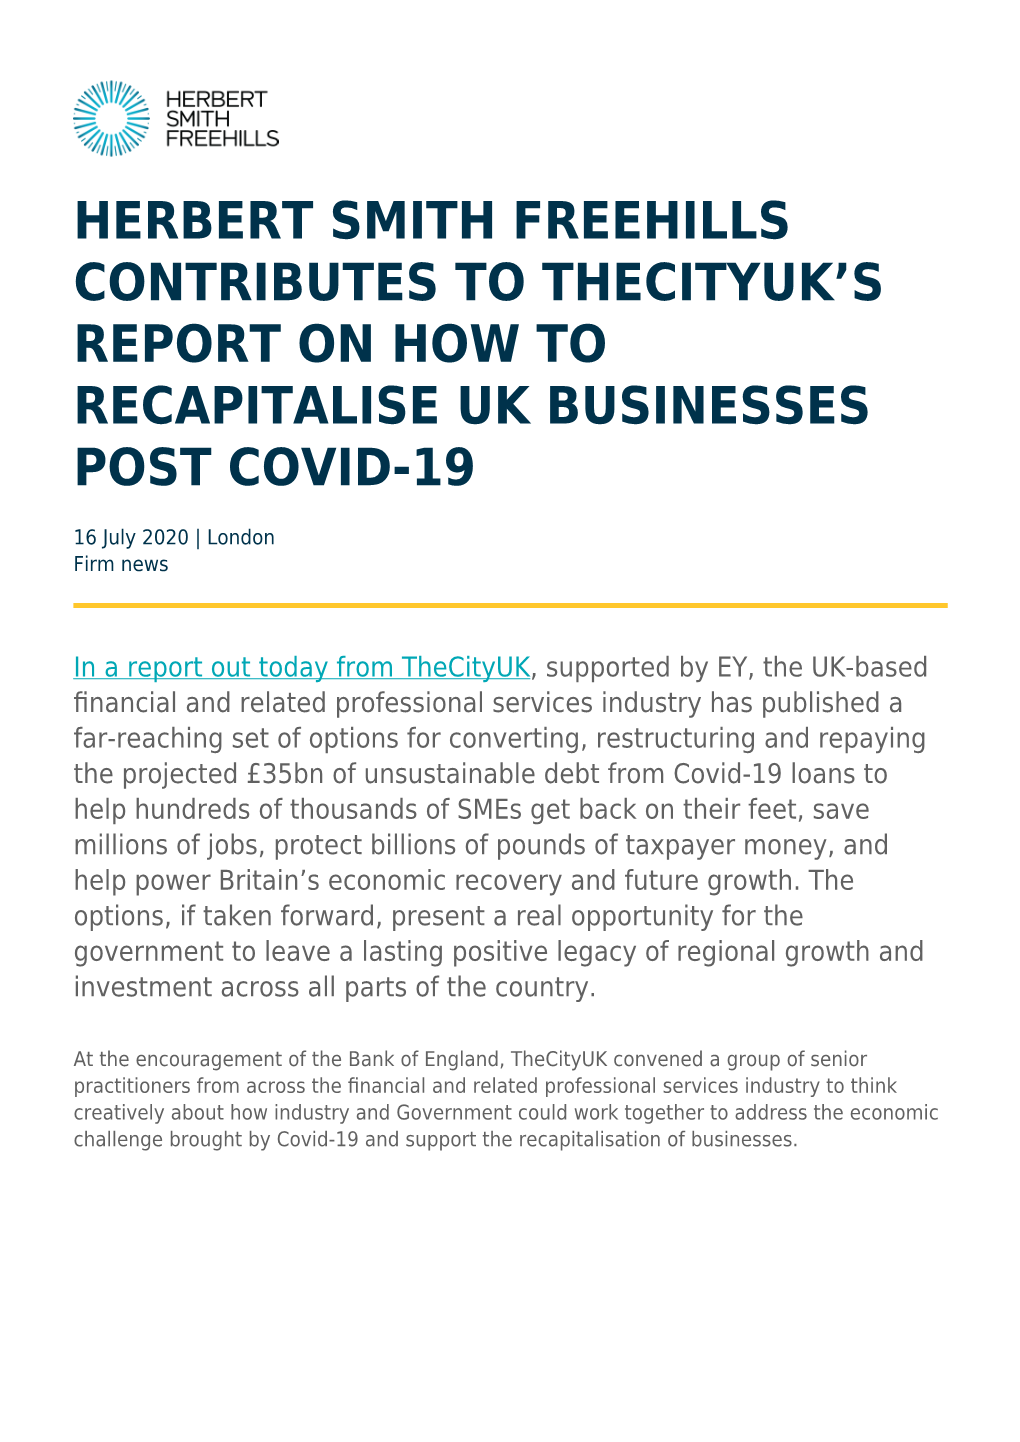 Herbert Smith Freehills Contributes to Thecityuk's Report on How To